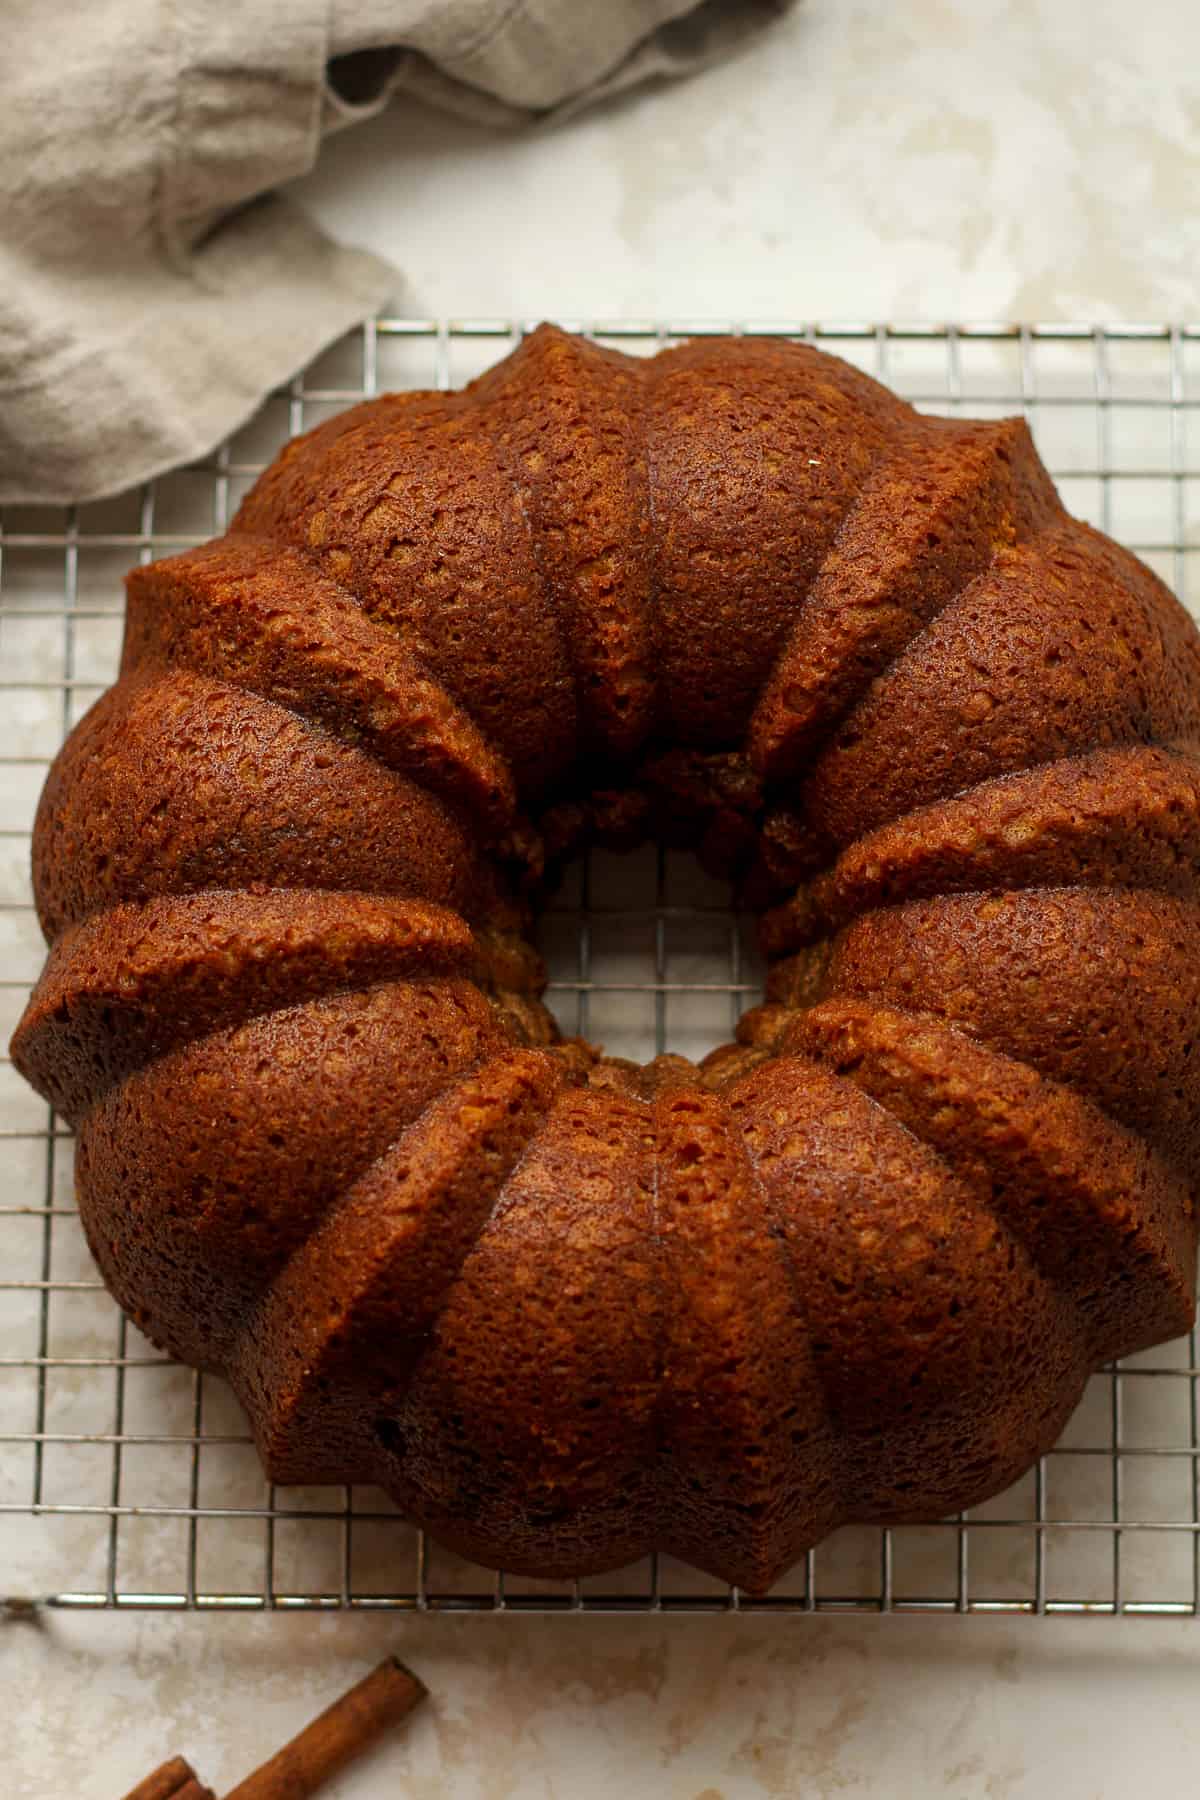 Overhead view of a just baked pumpkin bundt cake on a wire rack.